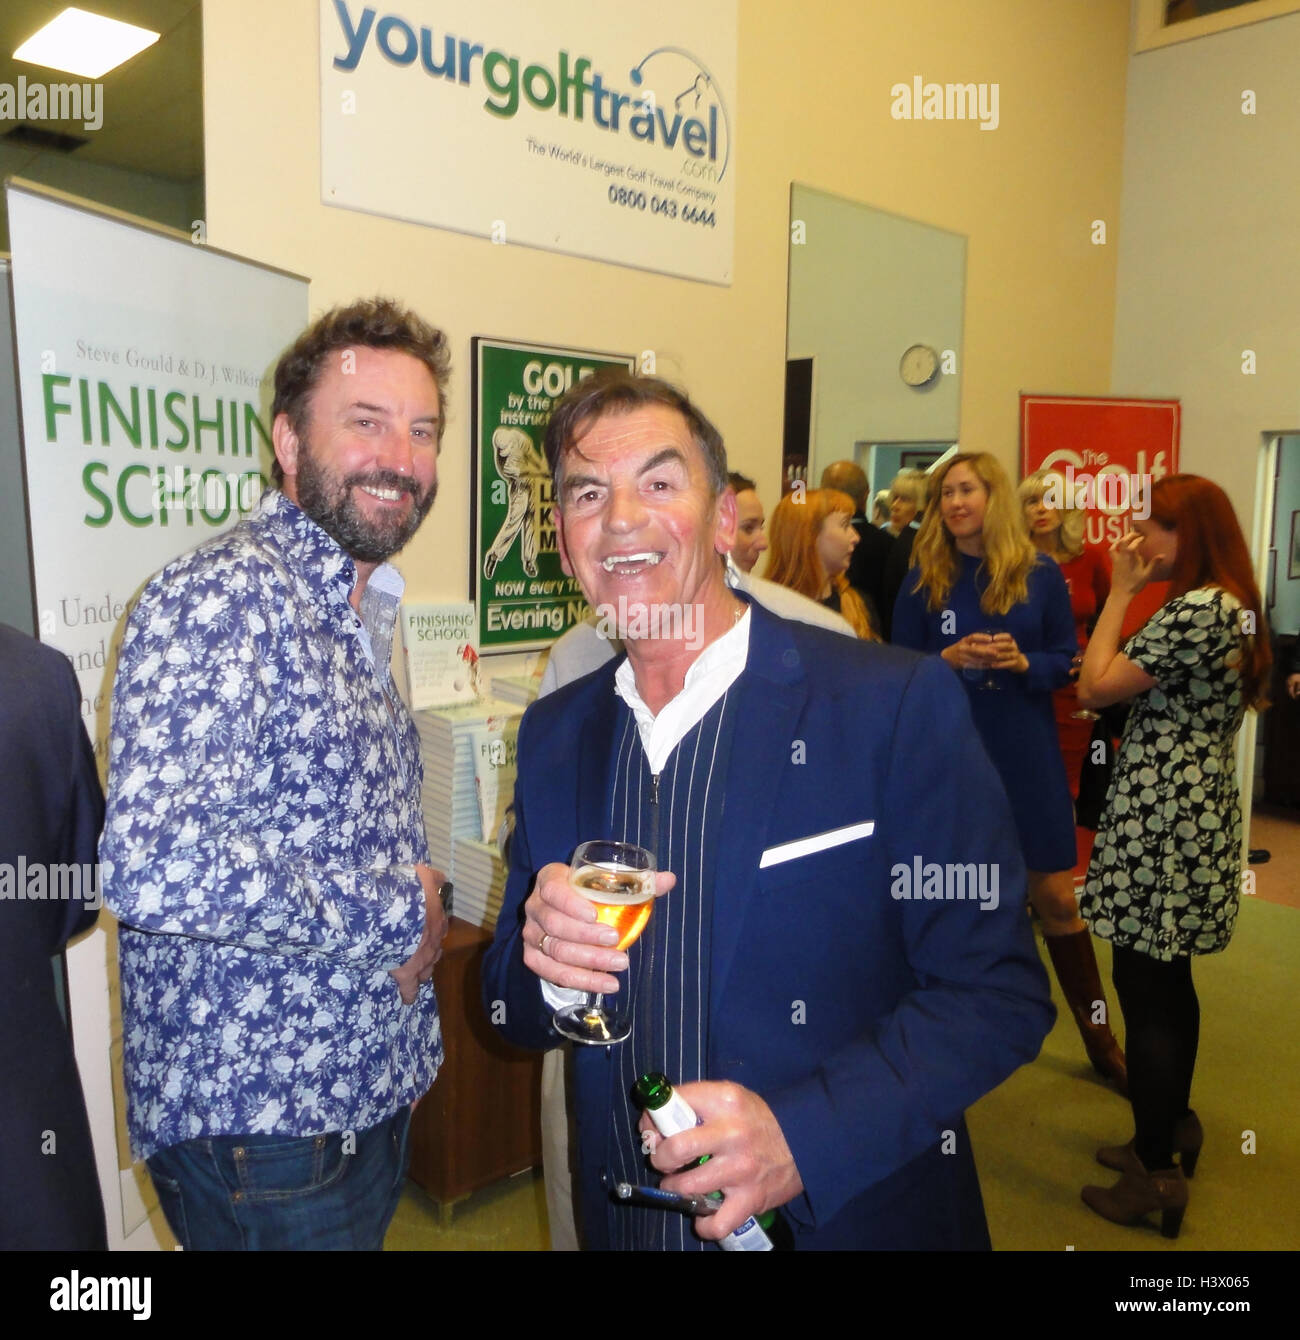 Knightsbridge, London, UK. 12th October, 2016. Lee Mack - comedian - and Knightsbridge  Golf School co-owner Steve Gould enjoy hospitality at the School during the  launch of their new instruction book "The